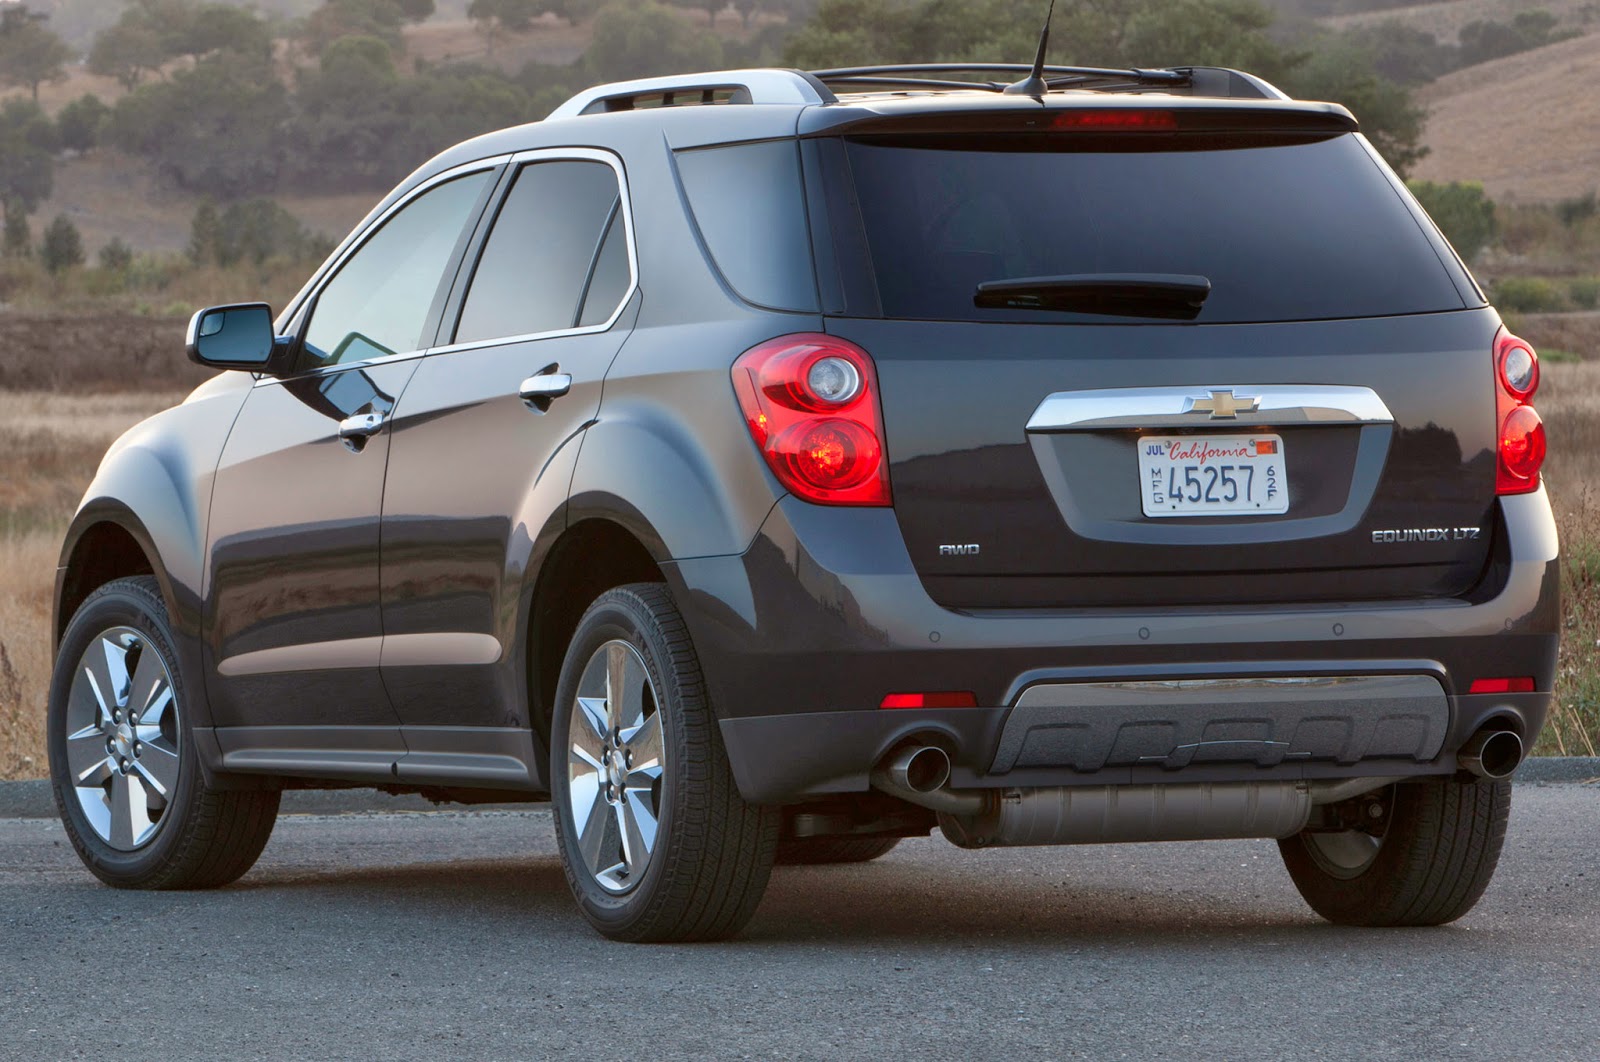 2015 Chevy Equinox | Top Cars